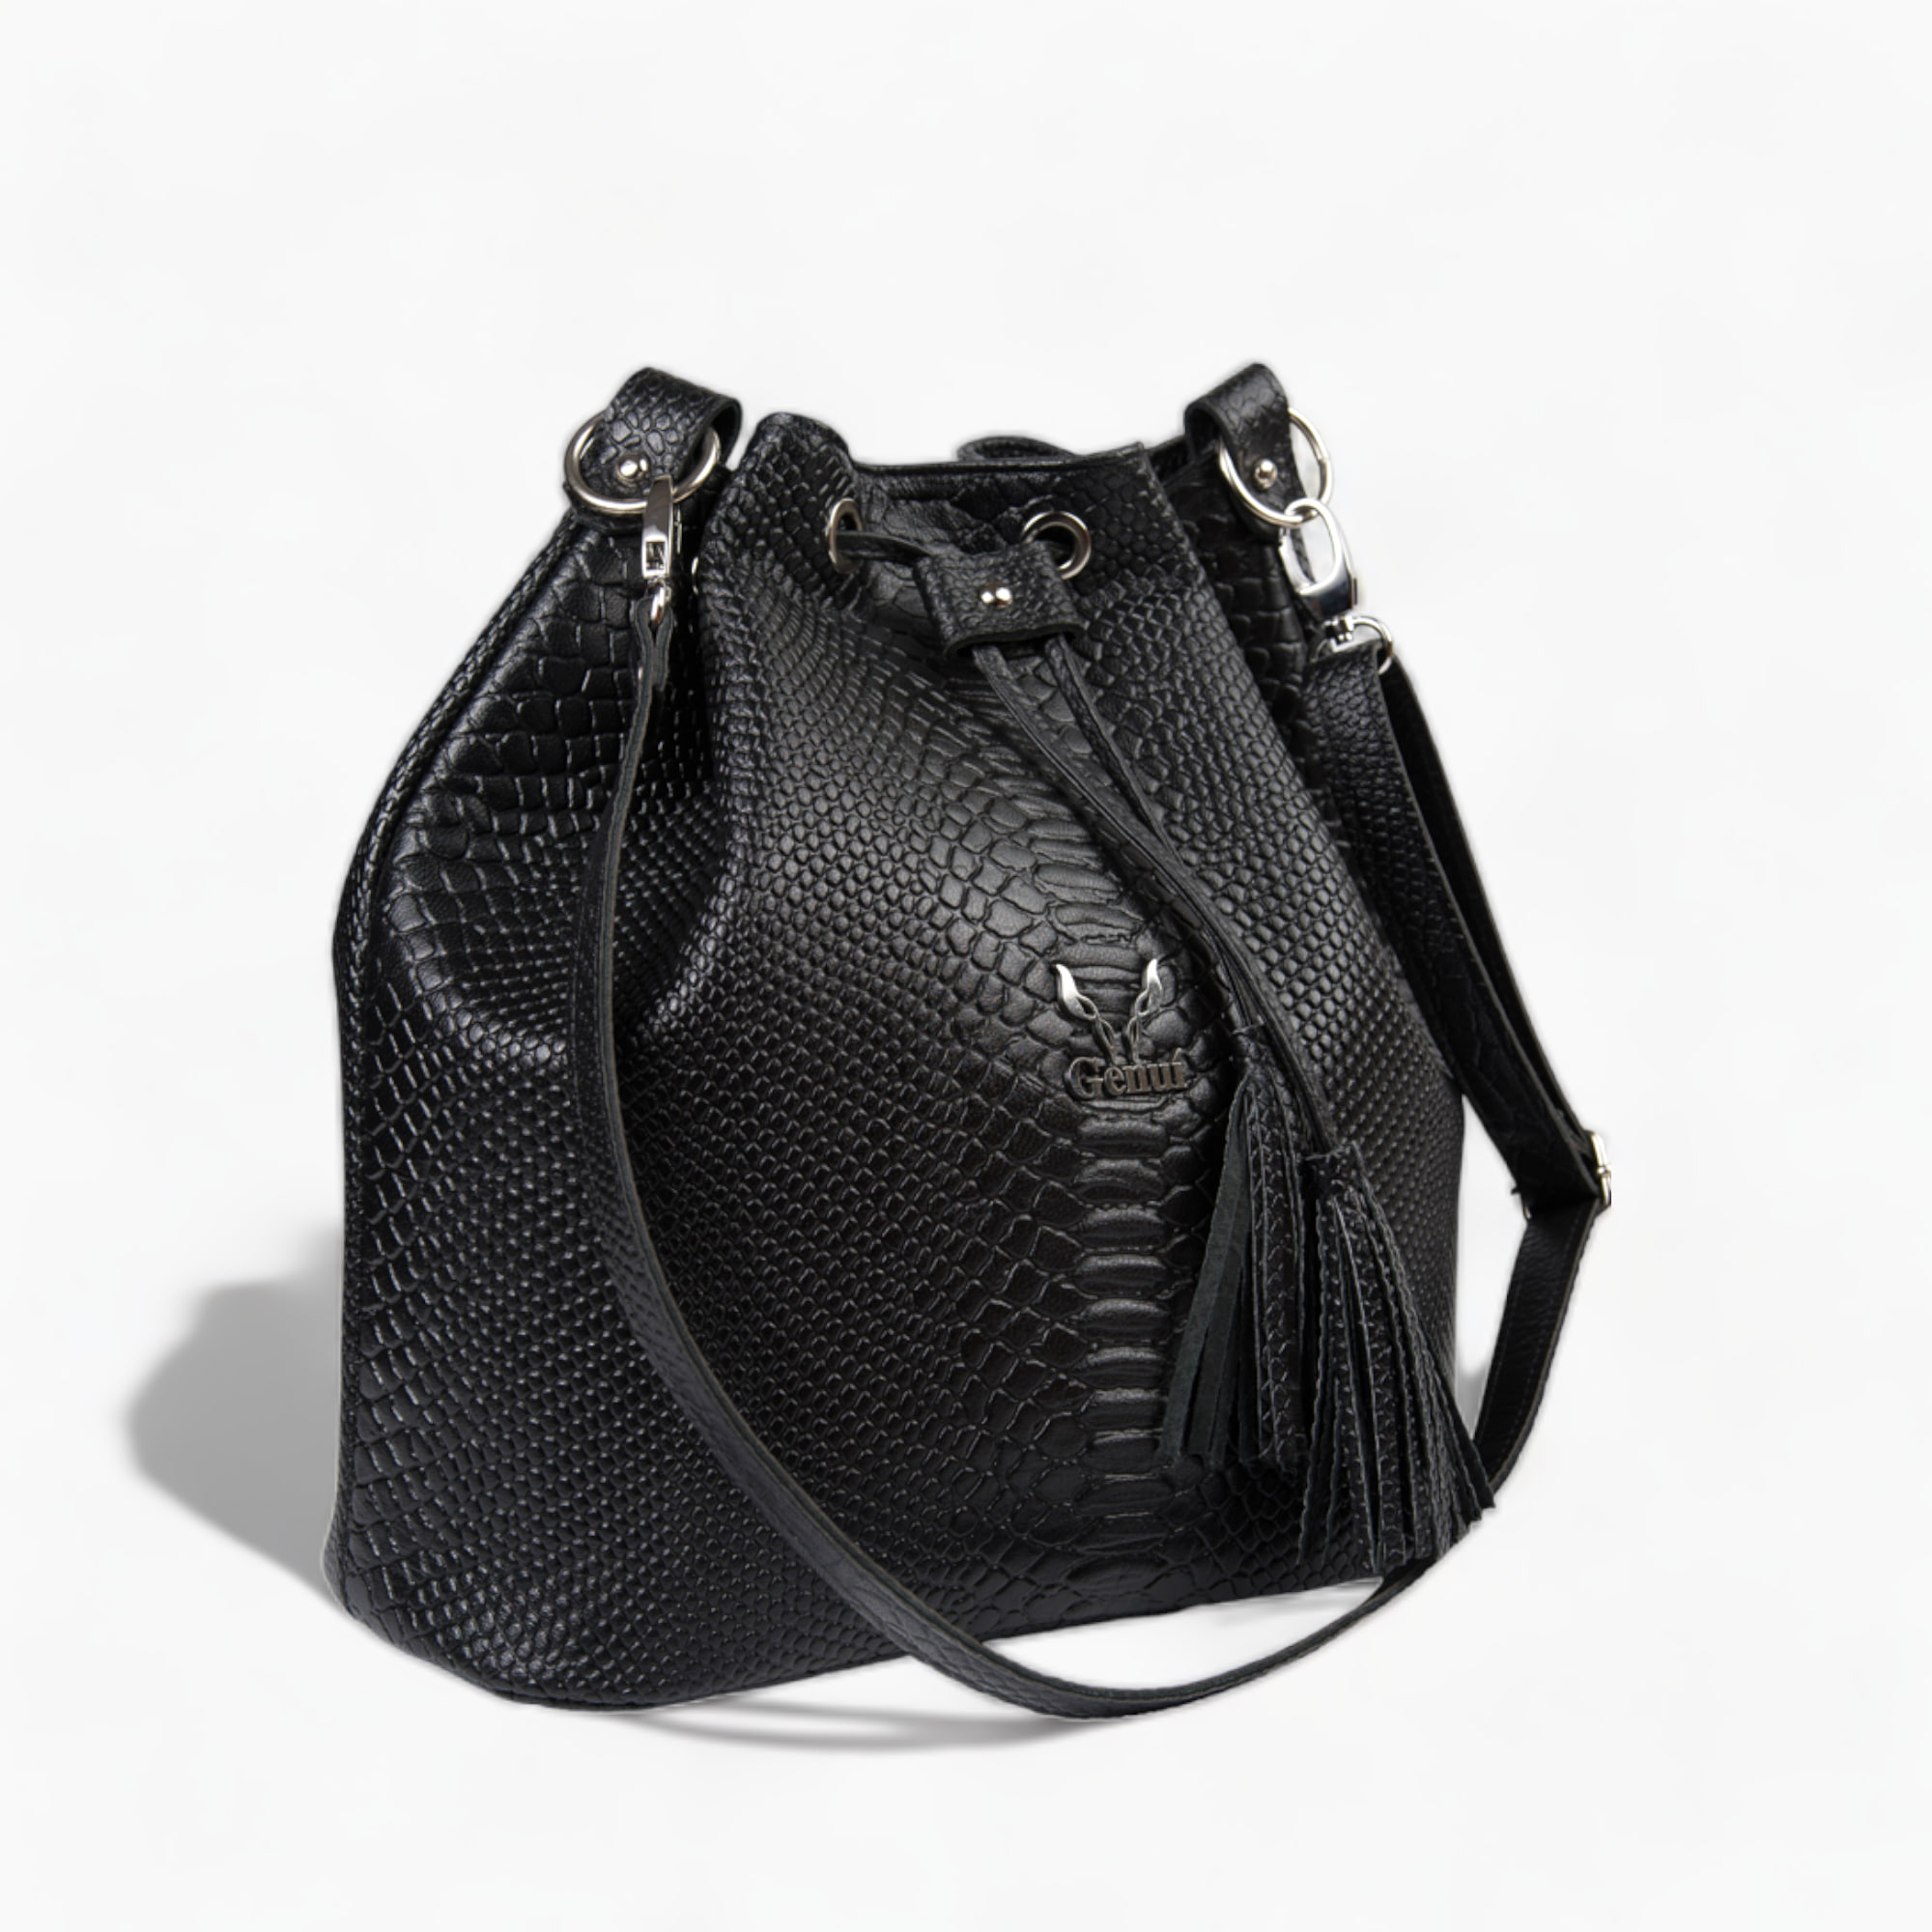 Leather polymorphic pouch bag in black color